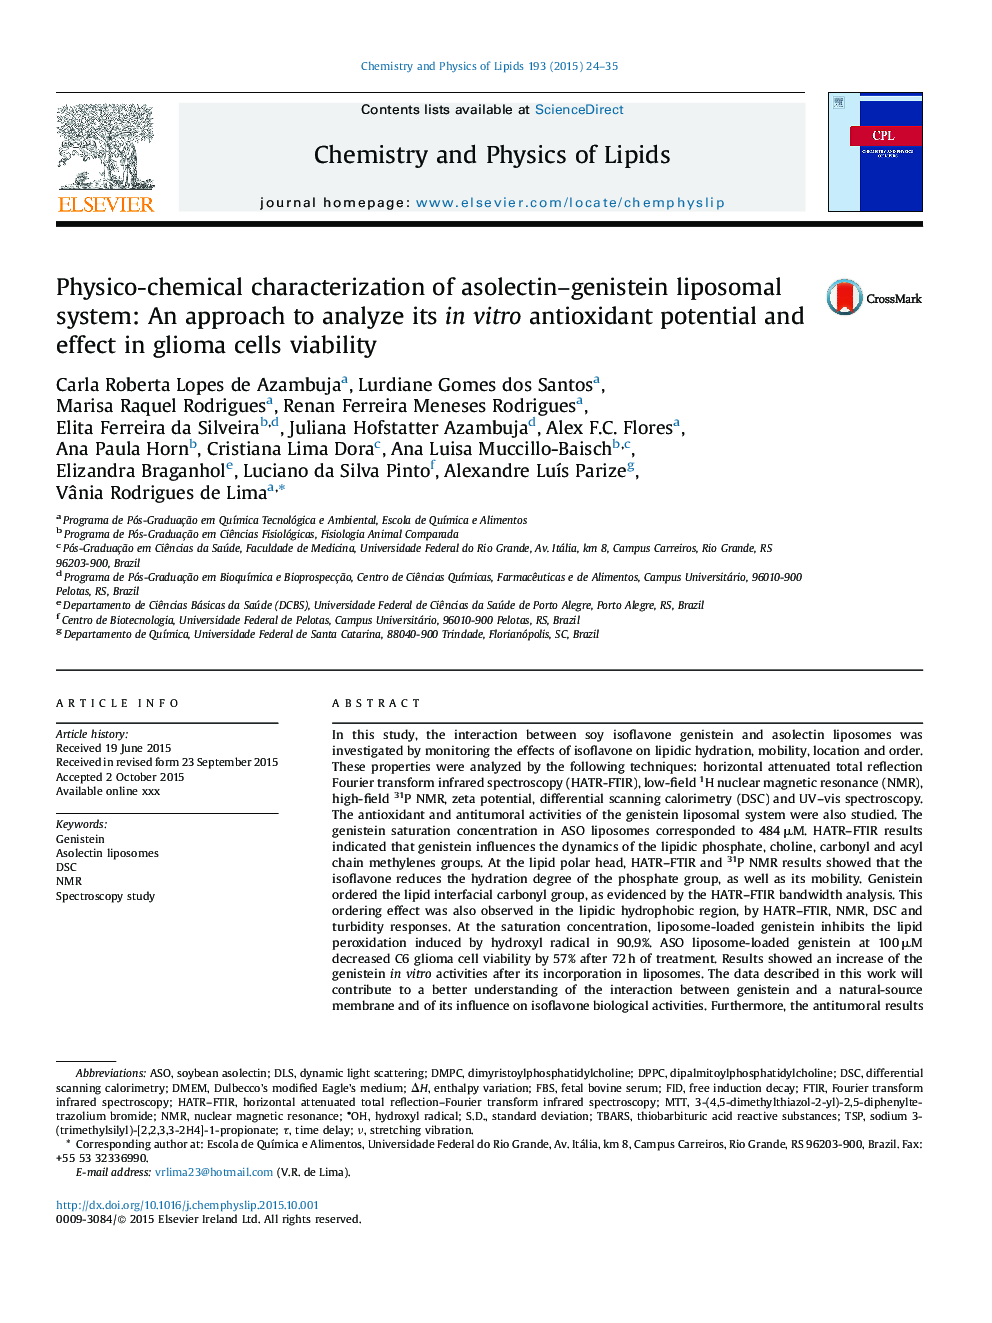 Physico-chemical characterization of asolectin-genistein liposomal system: An approach to analyze its in vitro antioxidant potential and effect in glioma cells viability